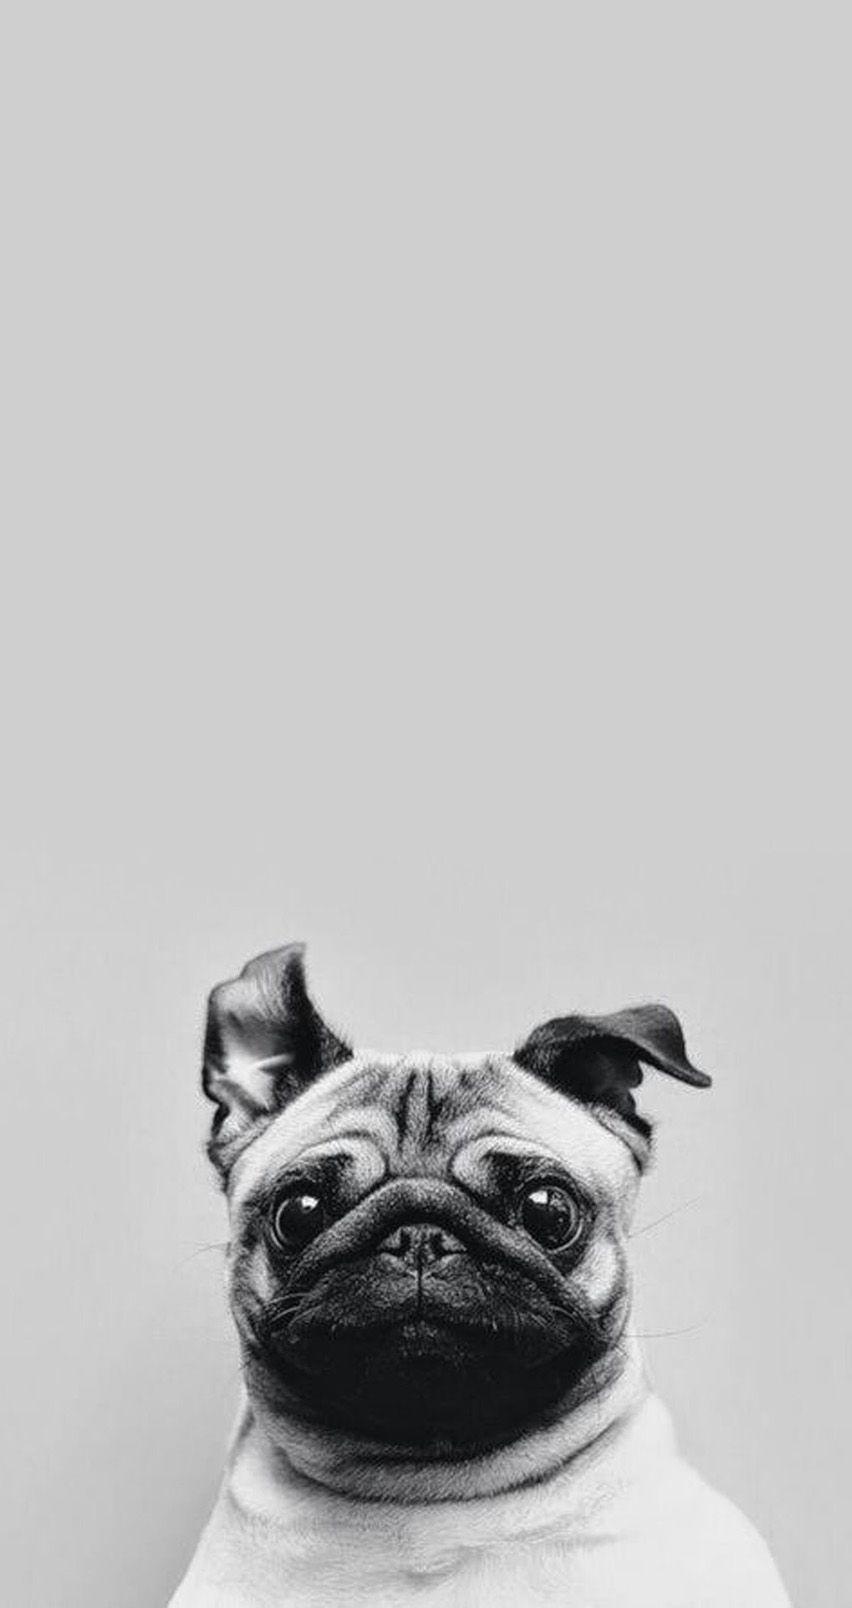 Cute #pug iPhone Wallpaper. Tap to see Collection of Cute